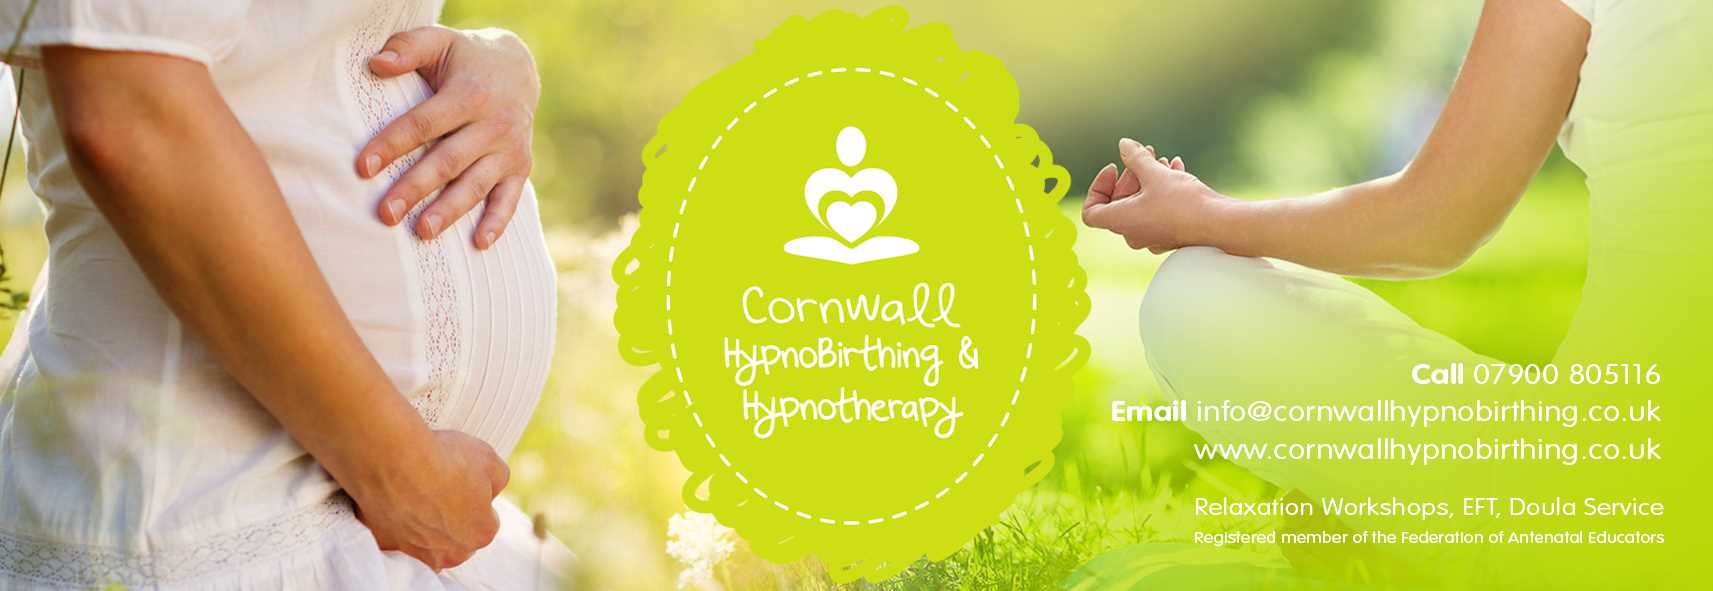 Cornwall HypnoBirthing & Hypnotherapy's main image